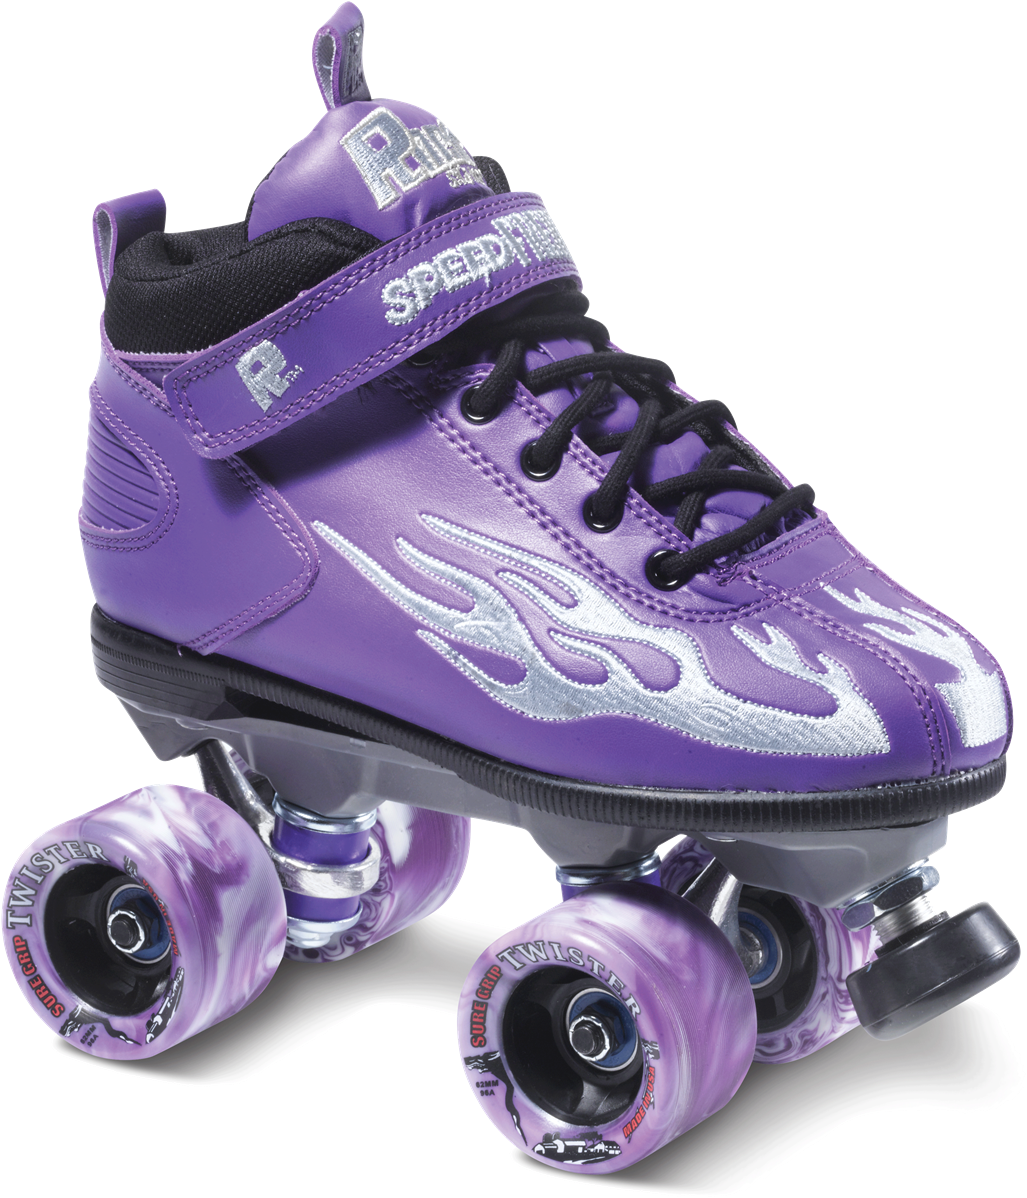 A Purple Roller Skate With White Flames